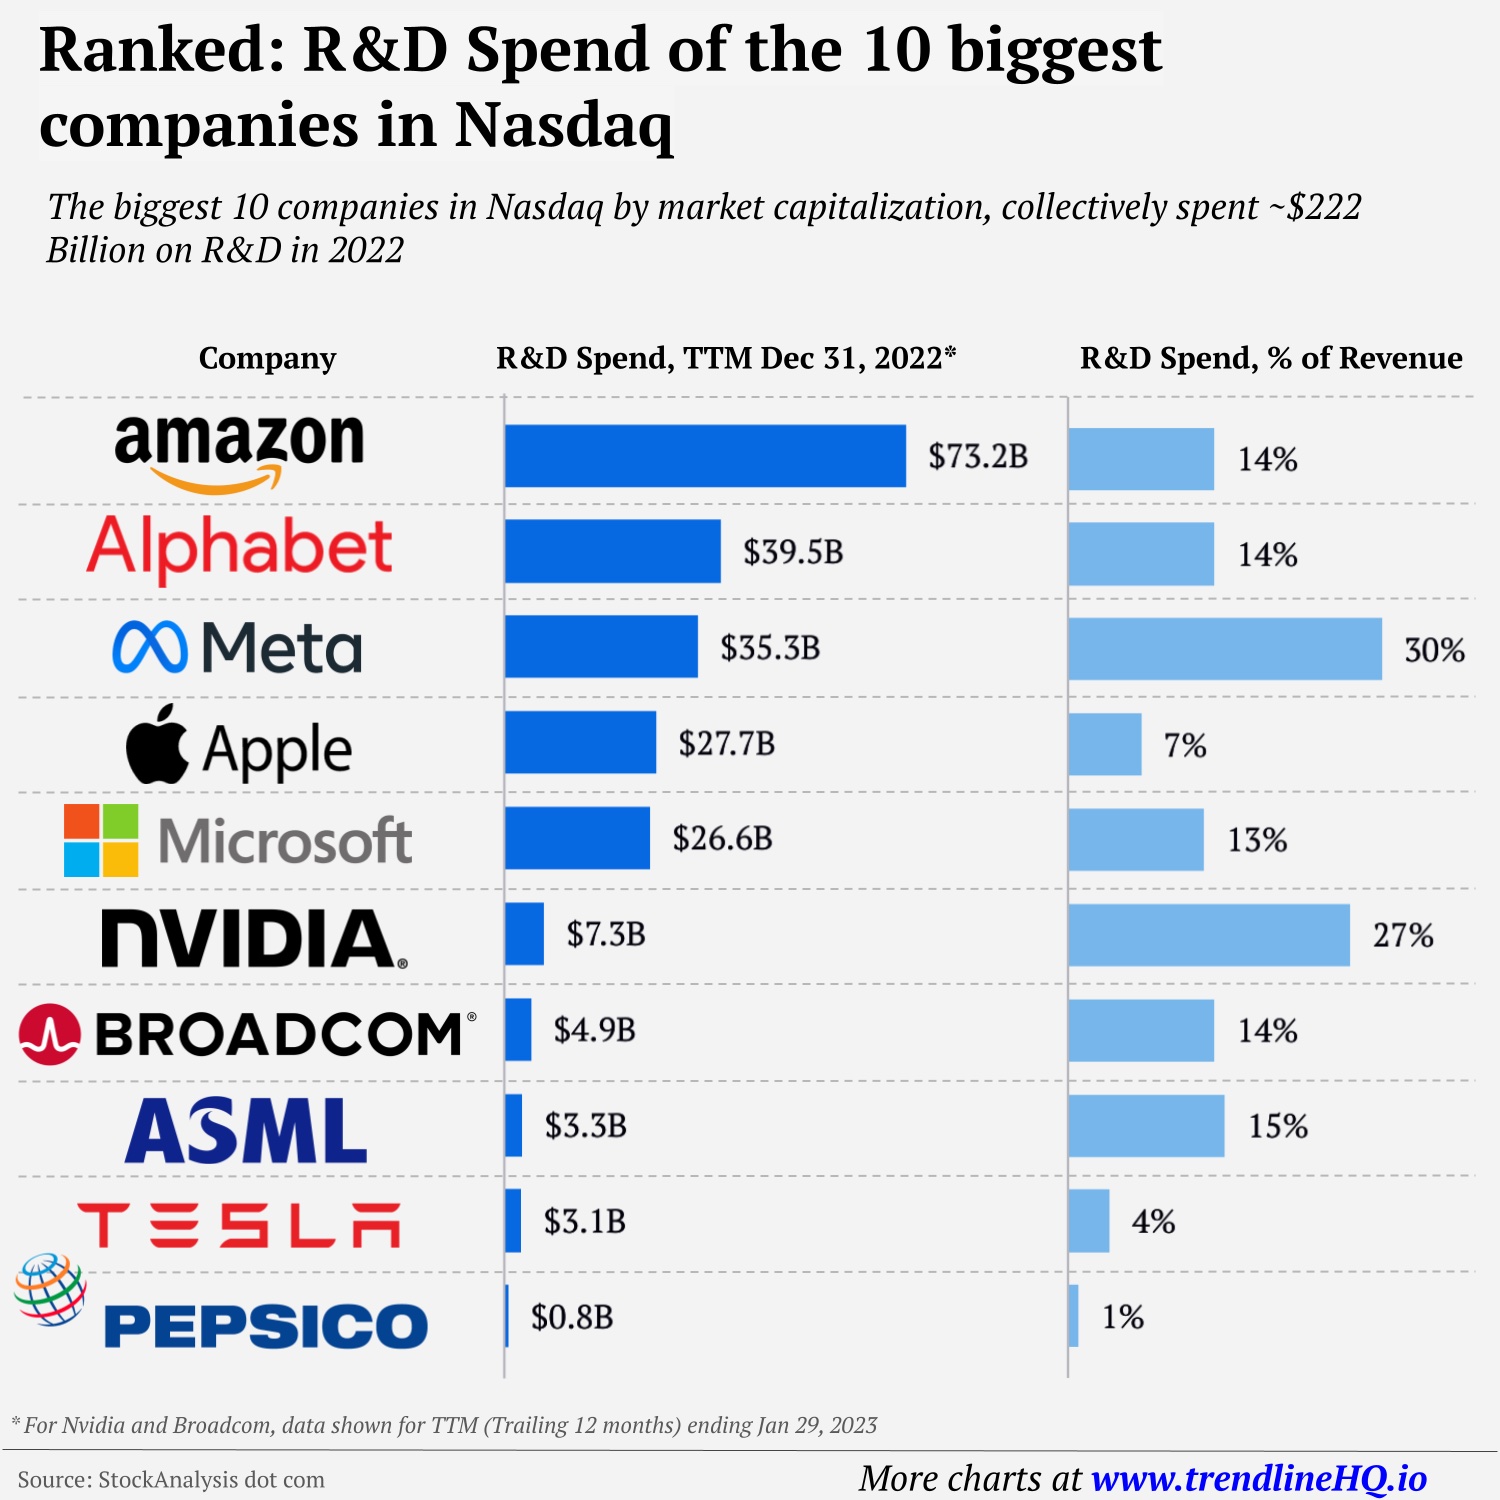 Visualizing R&D Investment by the 10 Biggest Nasdaq Companies